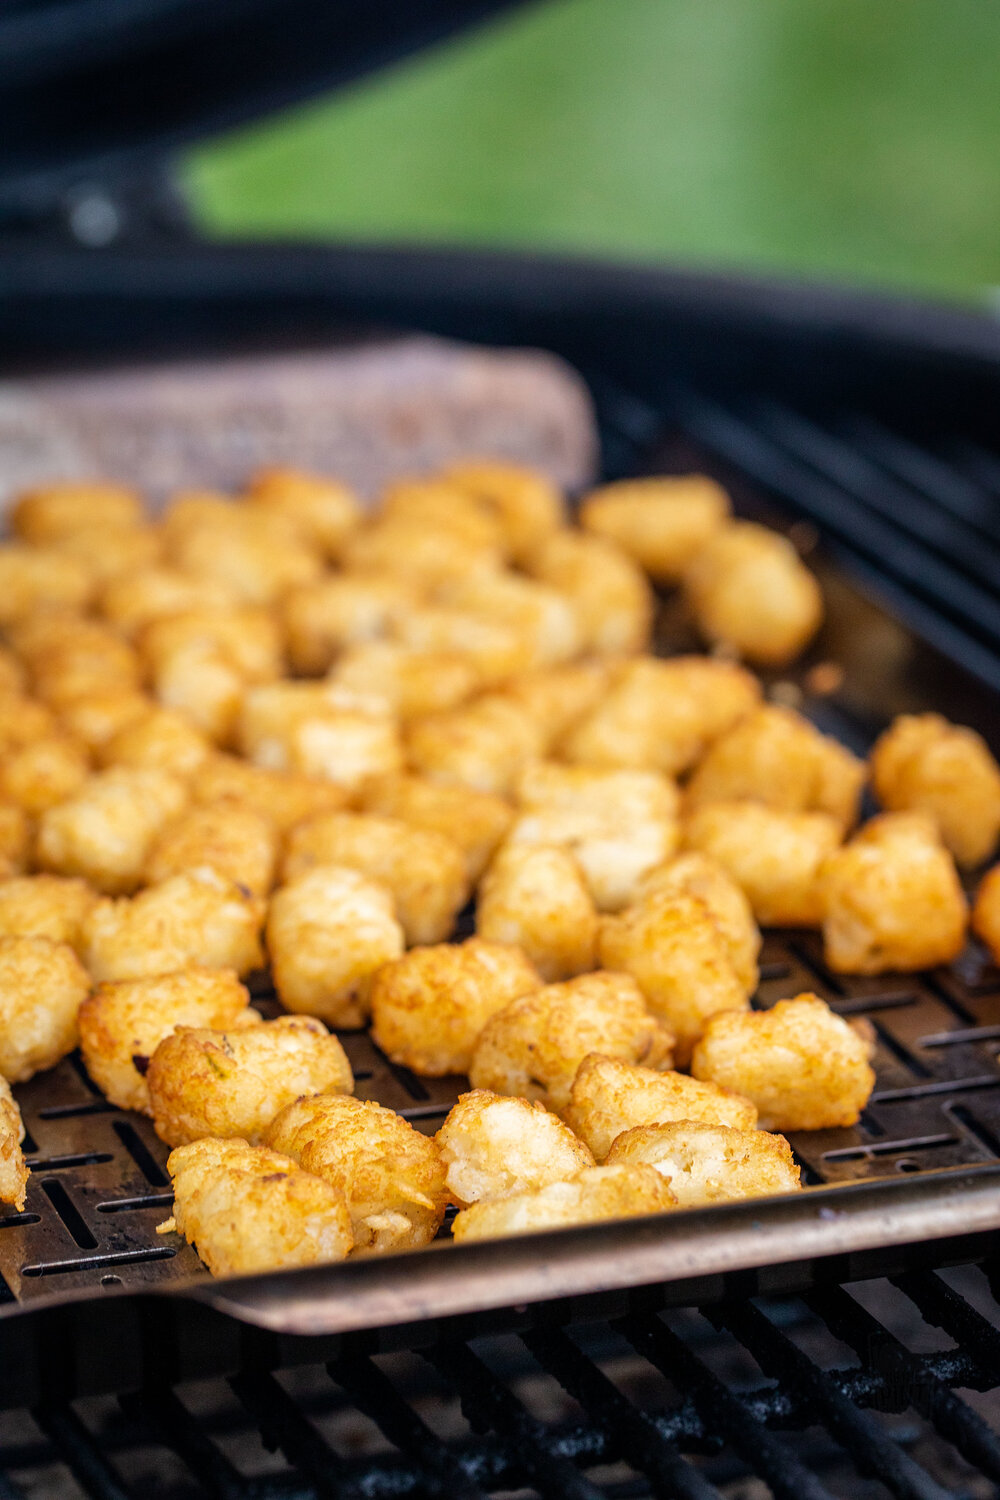 Grilled Tater Tots